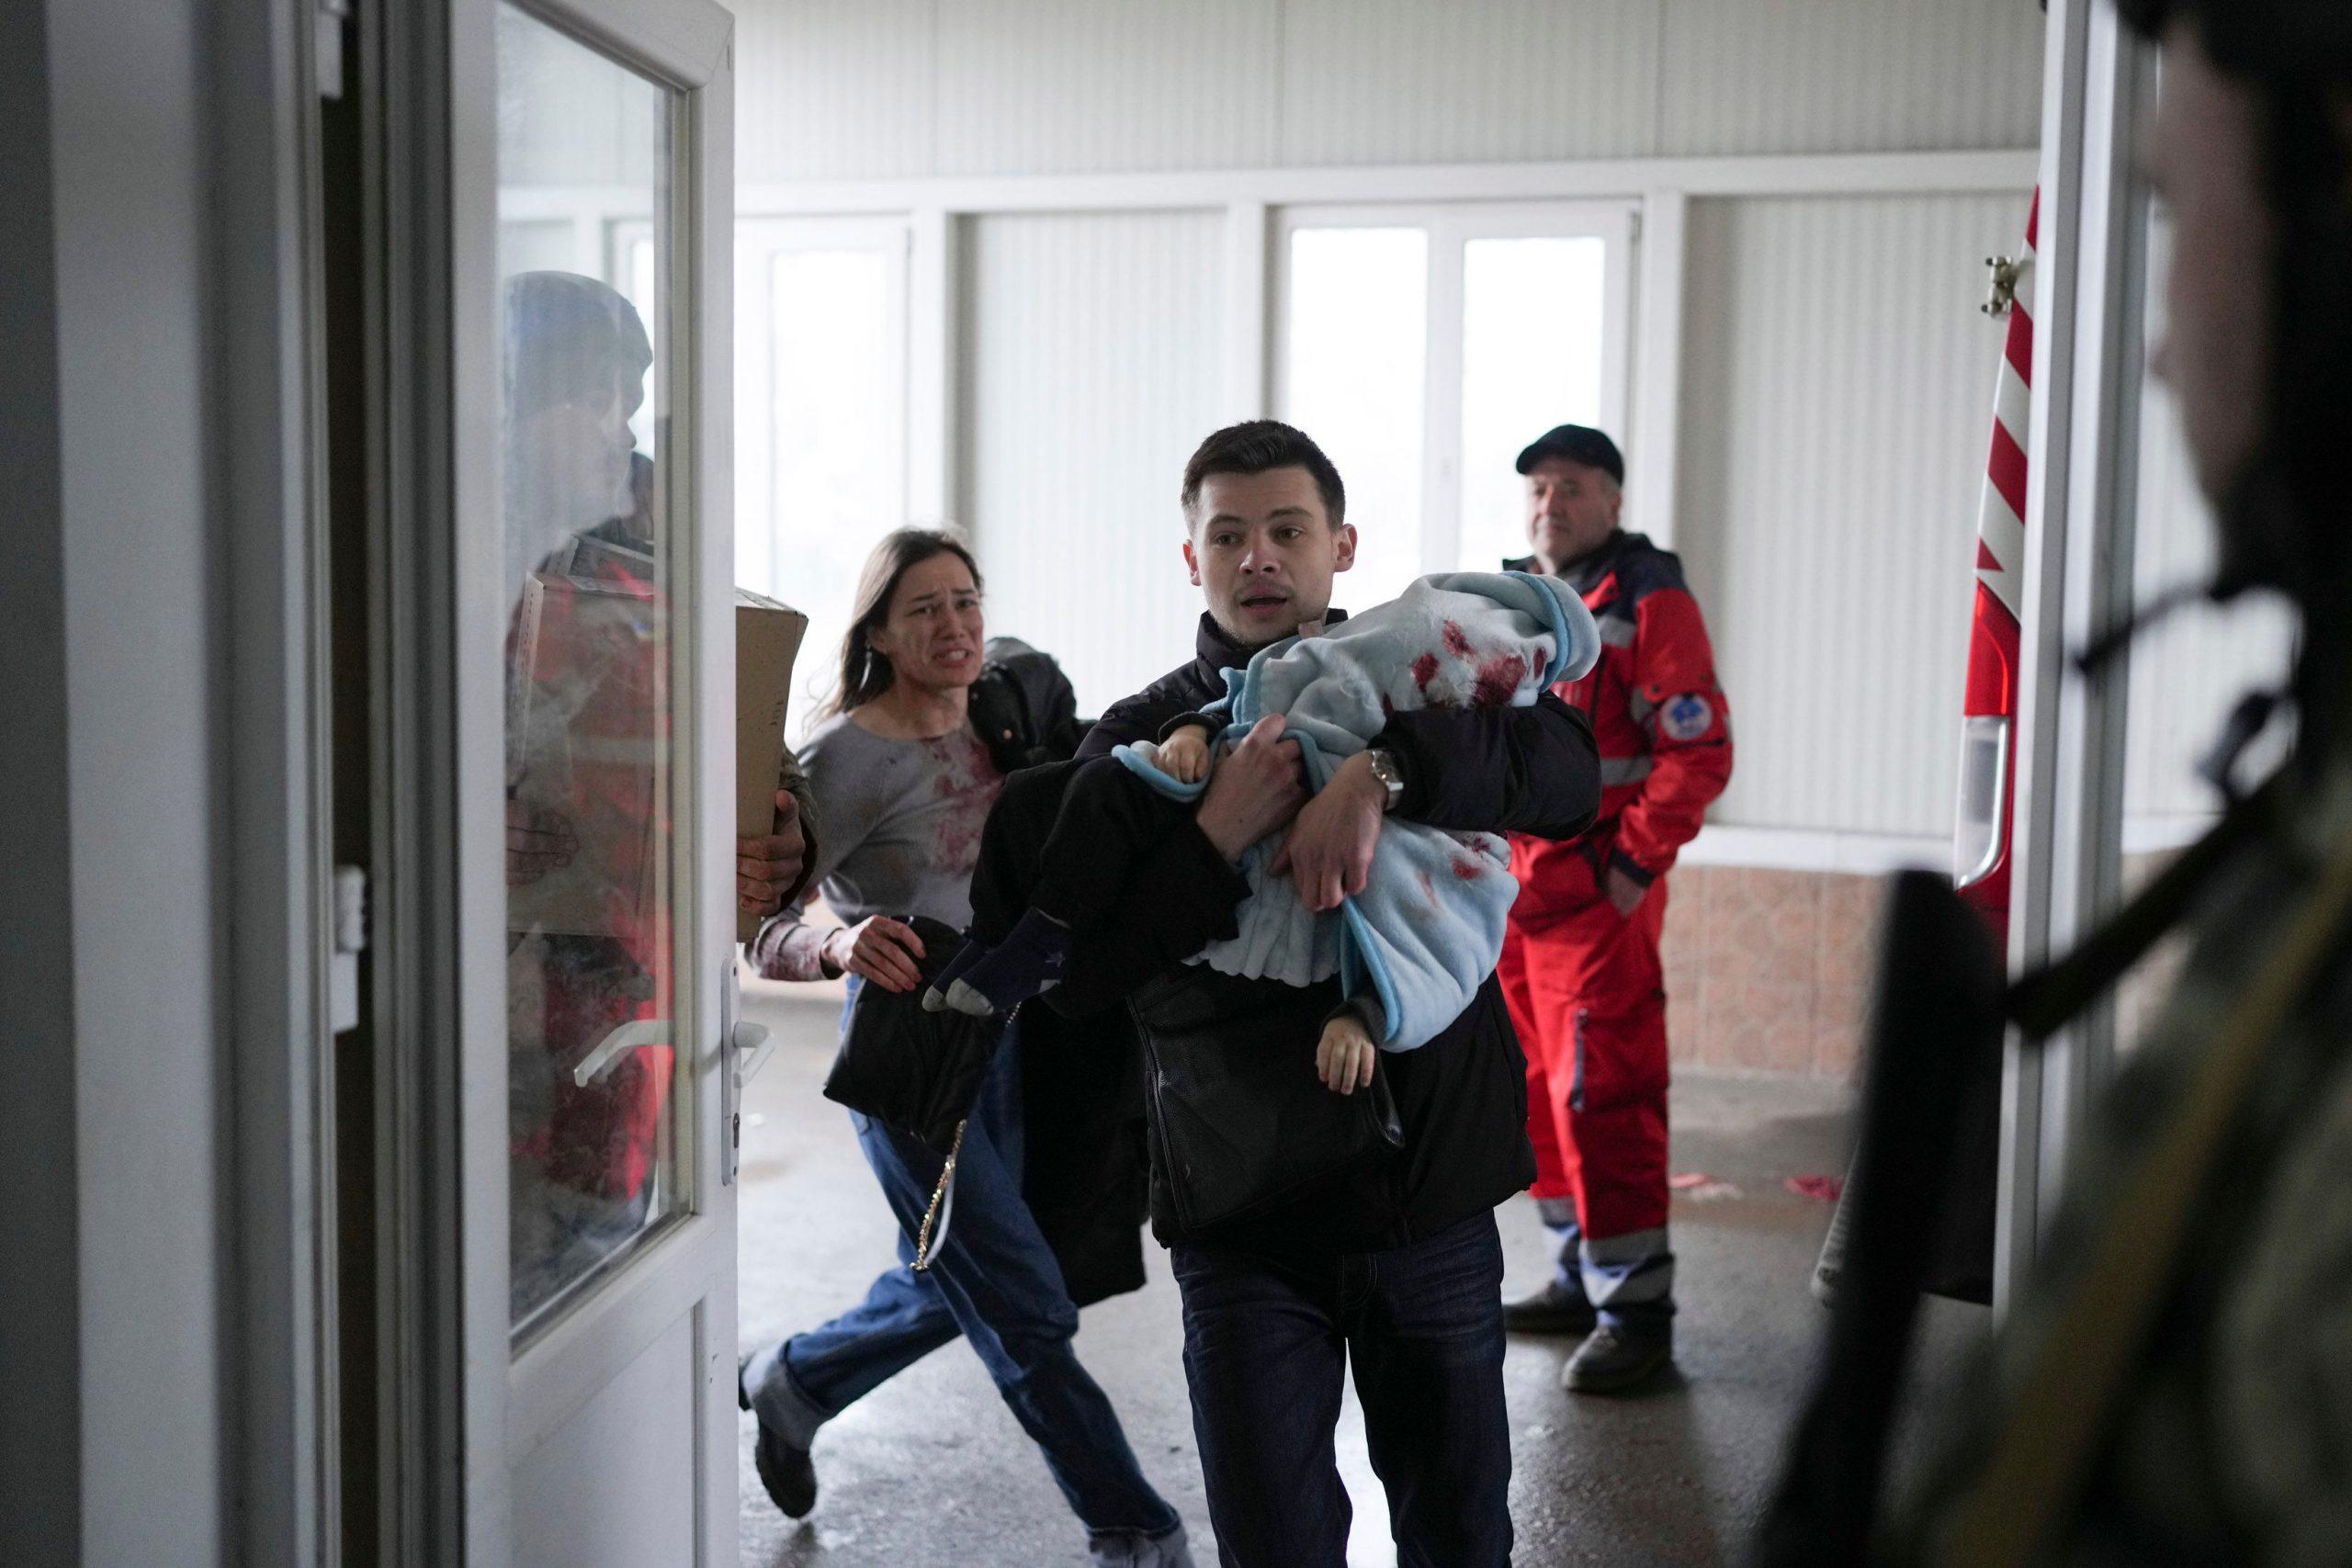 Ukraine crisis: 2nd attempt to evacuate civilians fails due to Russian shelling, says official